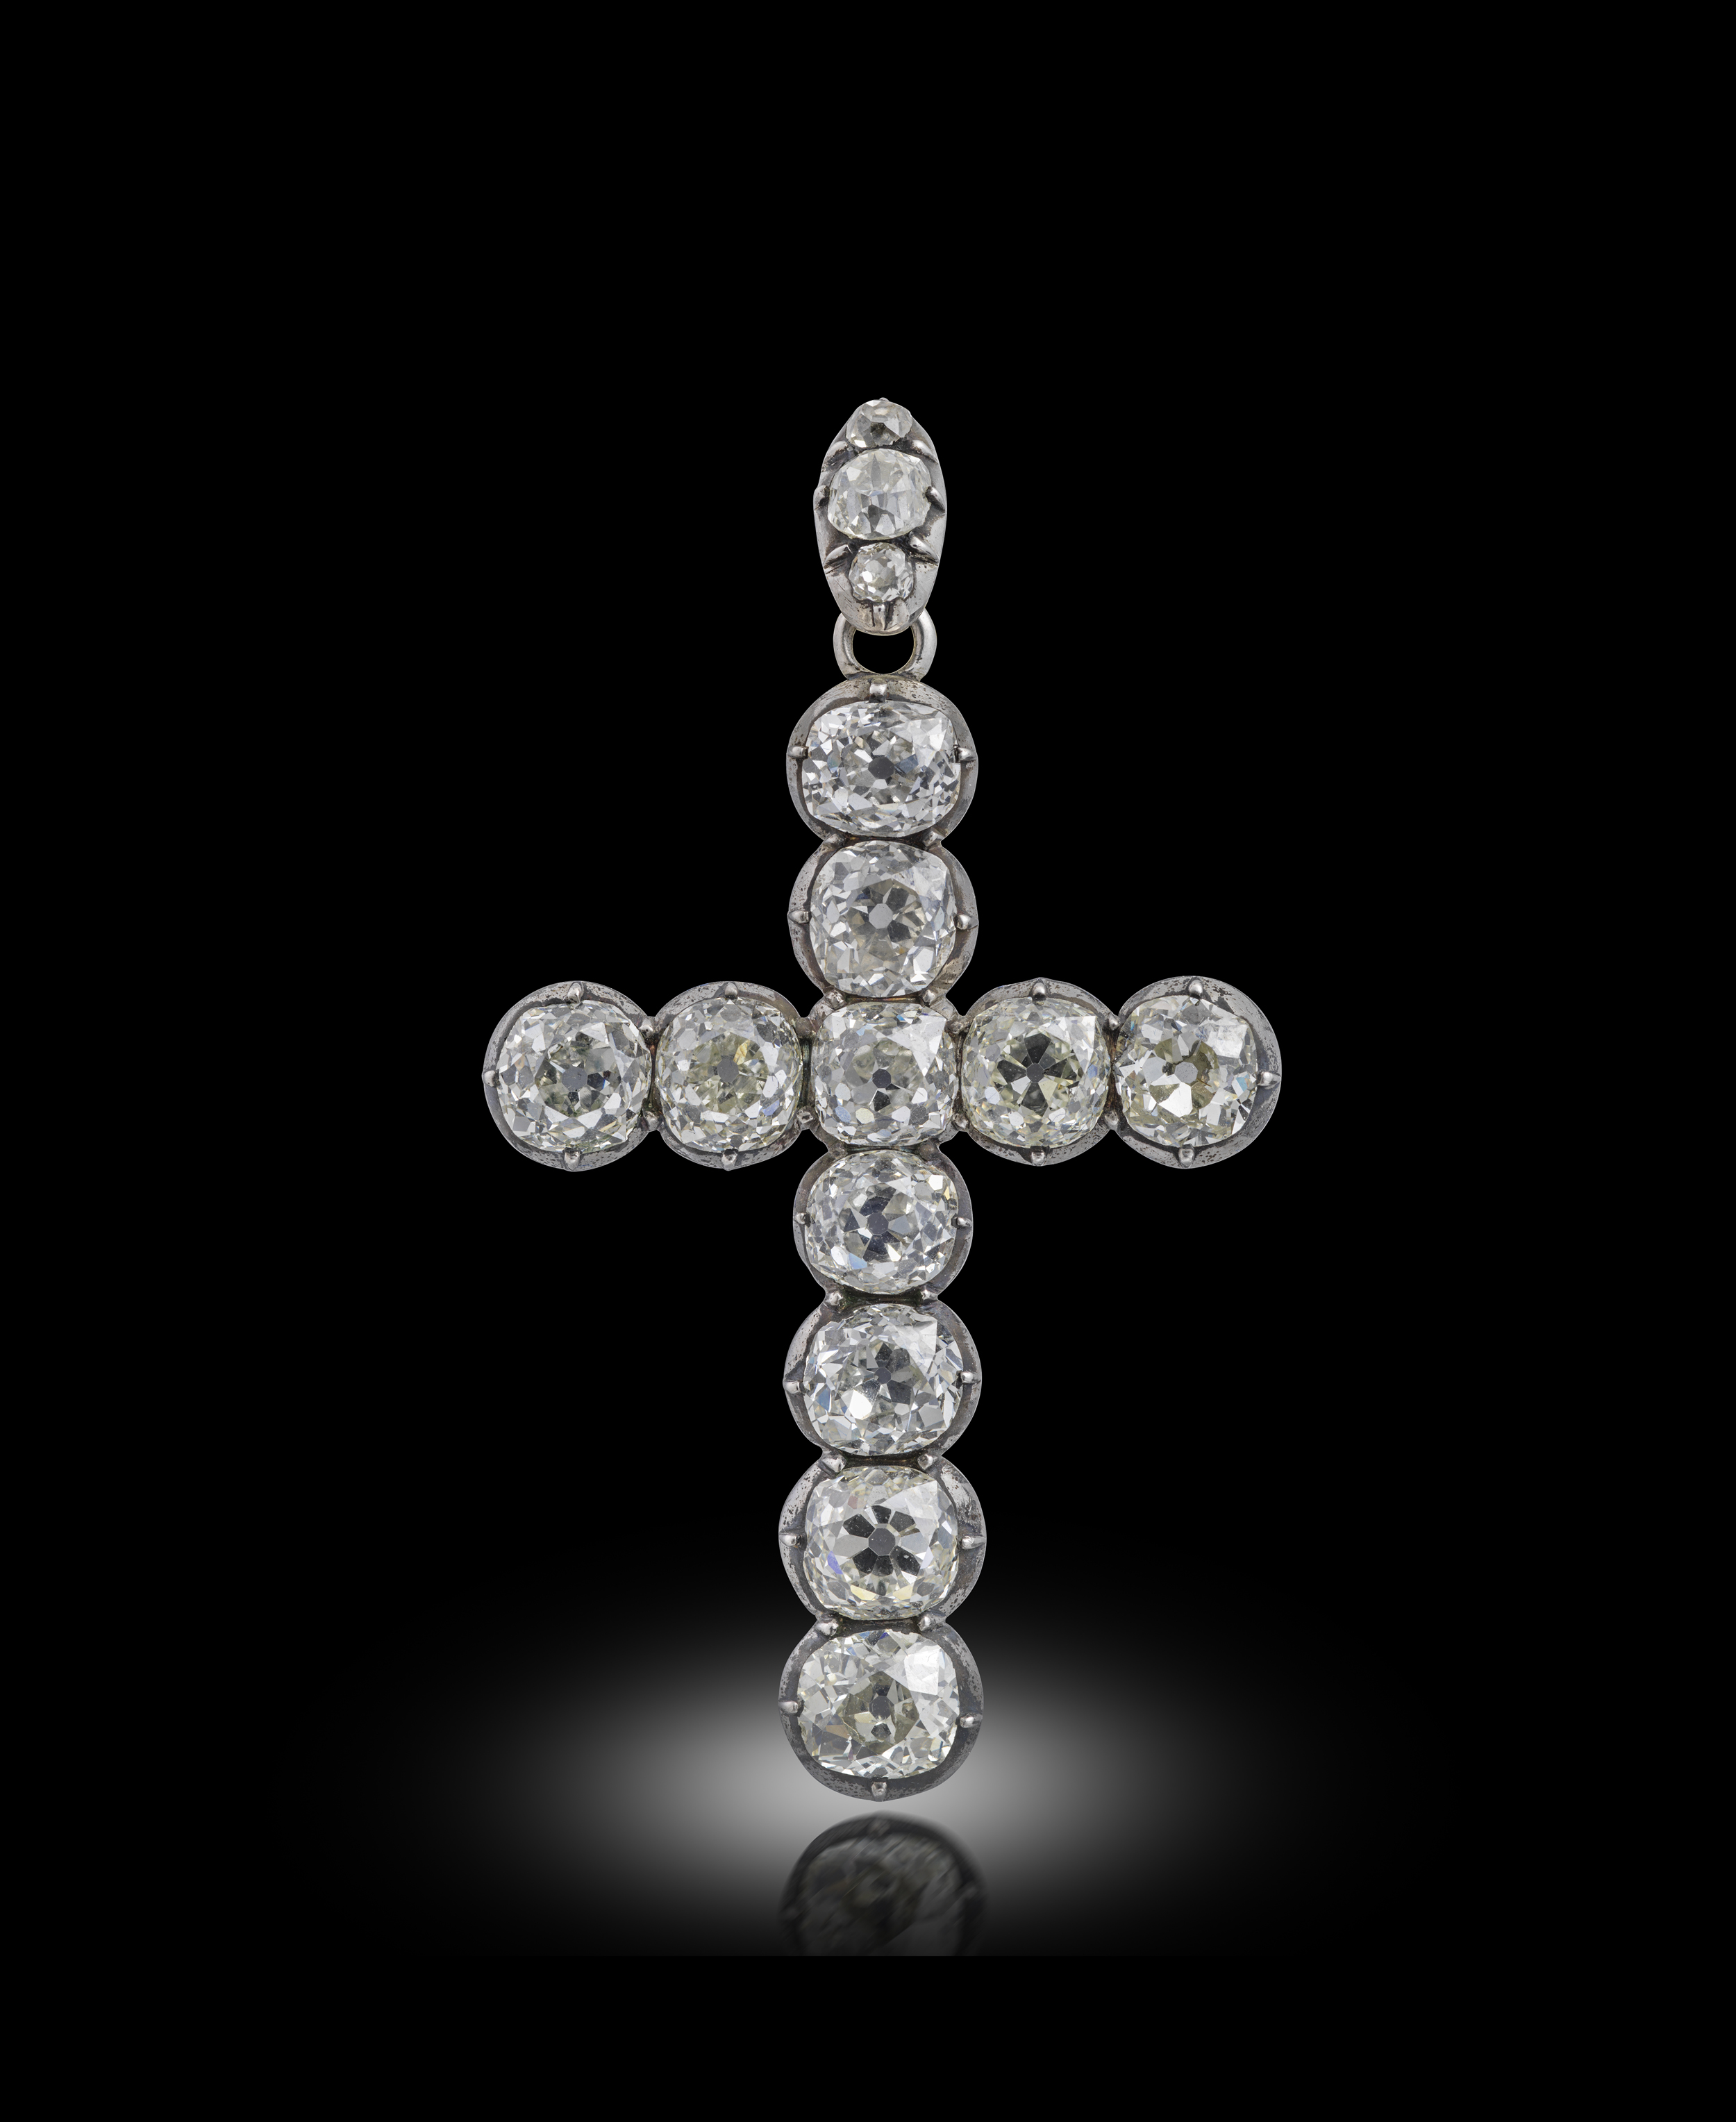 A late 19th century diamond cruciform pendant, set with eleven old cushion-shaped diamonds in silver